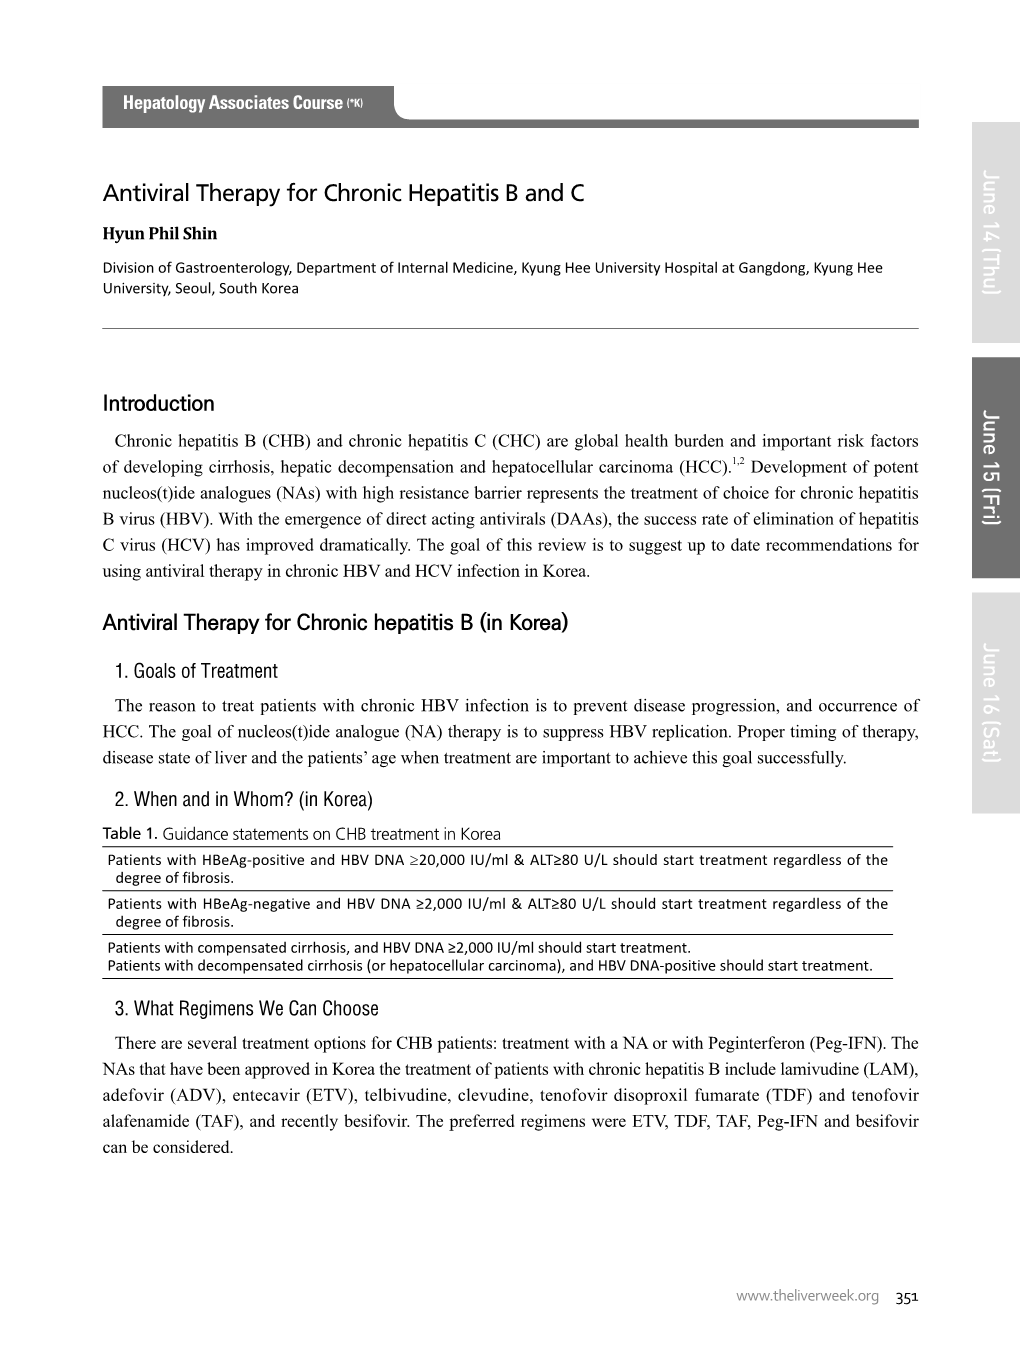 Antiviral Therapy for Chronic Hepatitis B and C